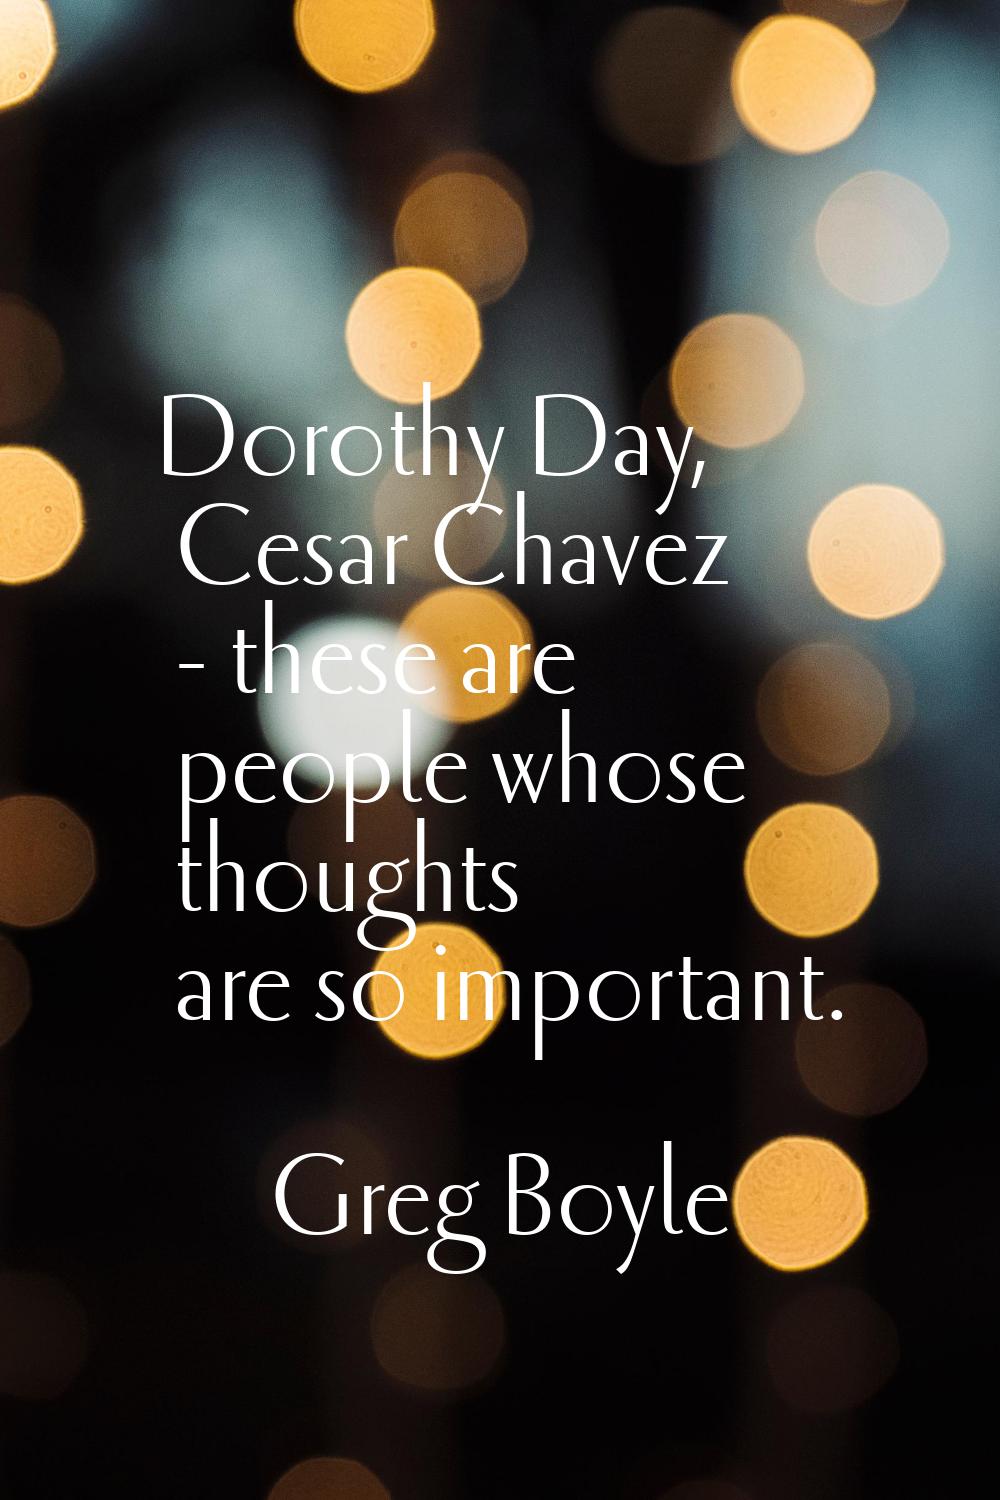 Dorothy Day, Cesar Chavez - these are people whose thoughts are so important.